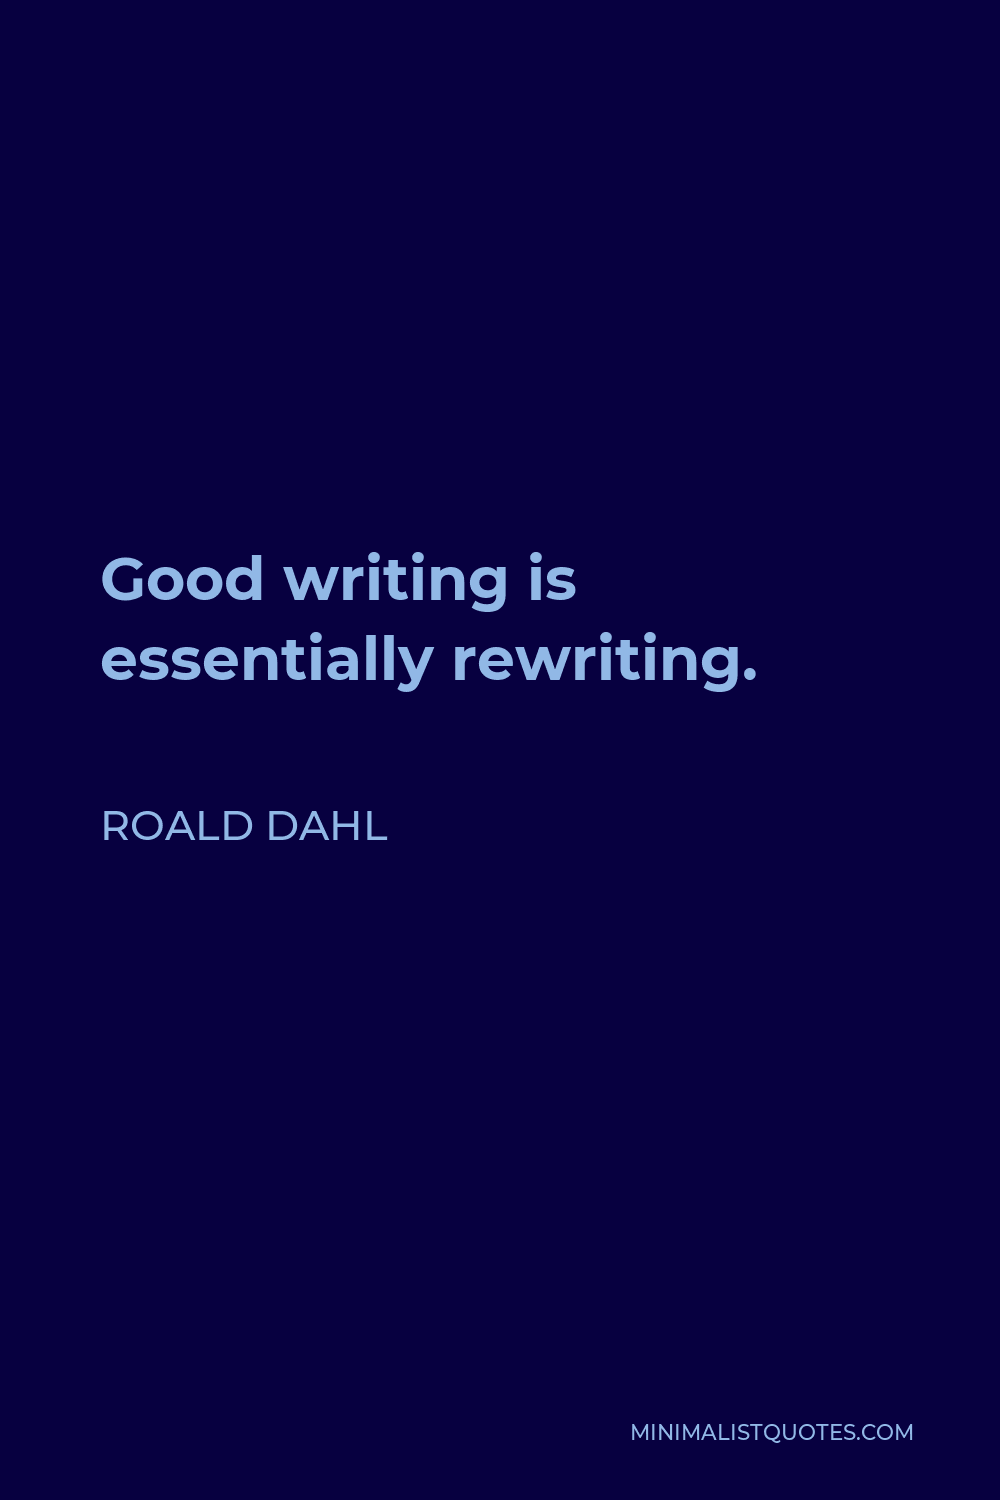 Roald Dahl Quote - Good writing is essentially rewriting.